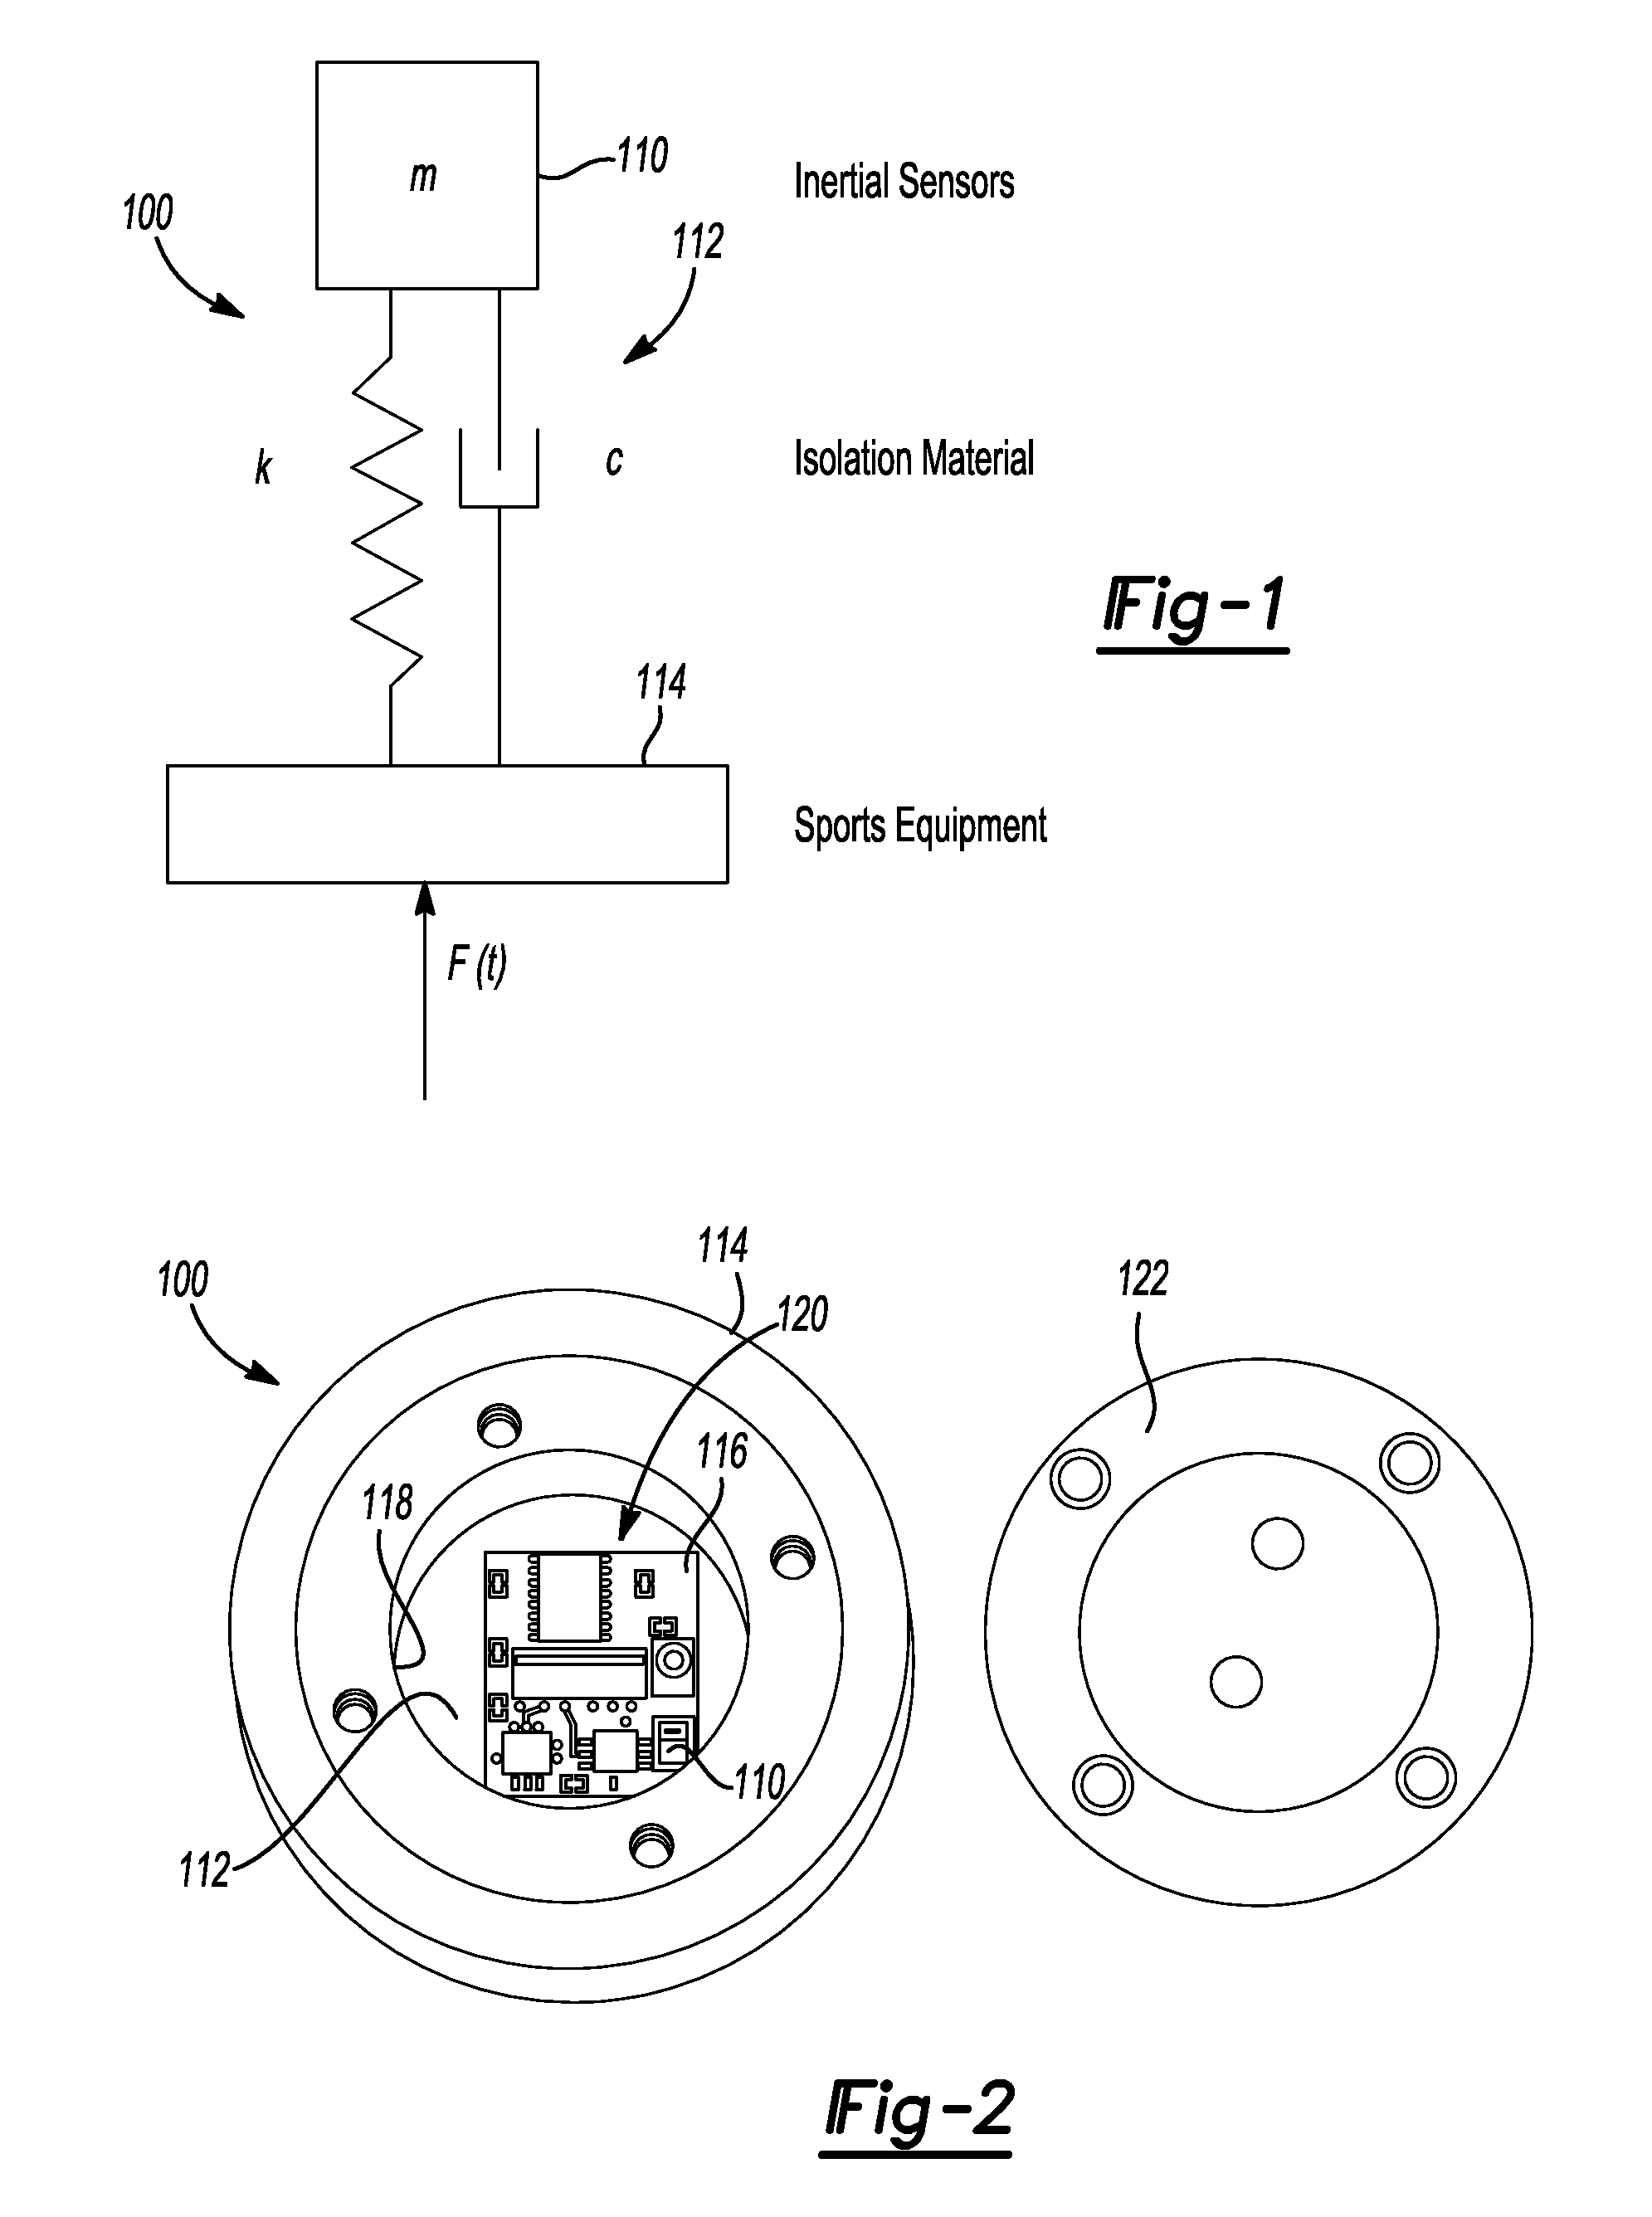 Apparatus and method for employing miniature inertial measurement units for deducing forces and moments on bodies